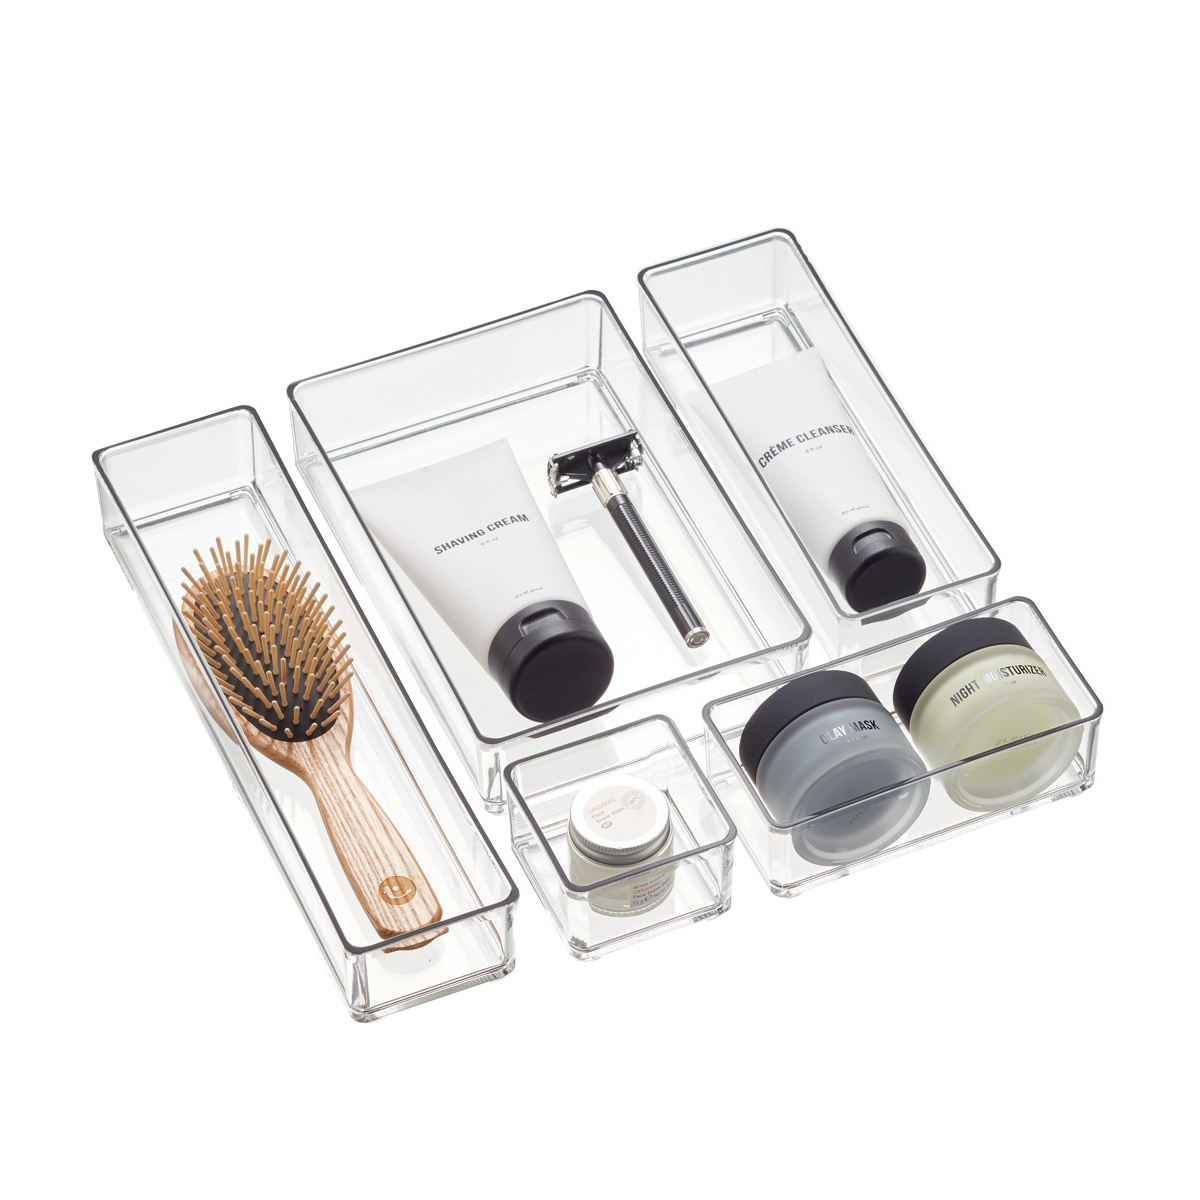 https://www.containerstore.com/catalogimages/471698/10090092-acrylic-stacking-drawer-org.jpg